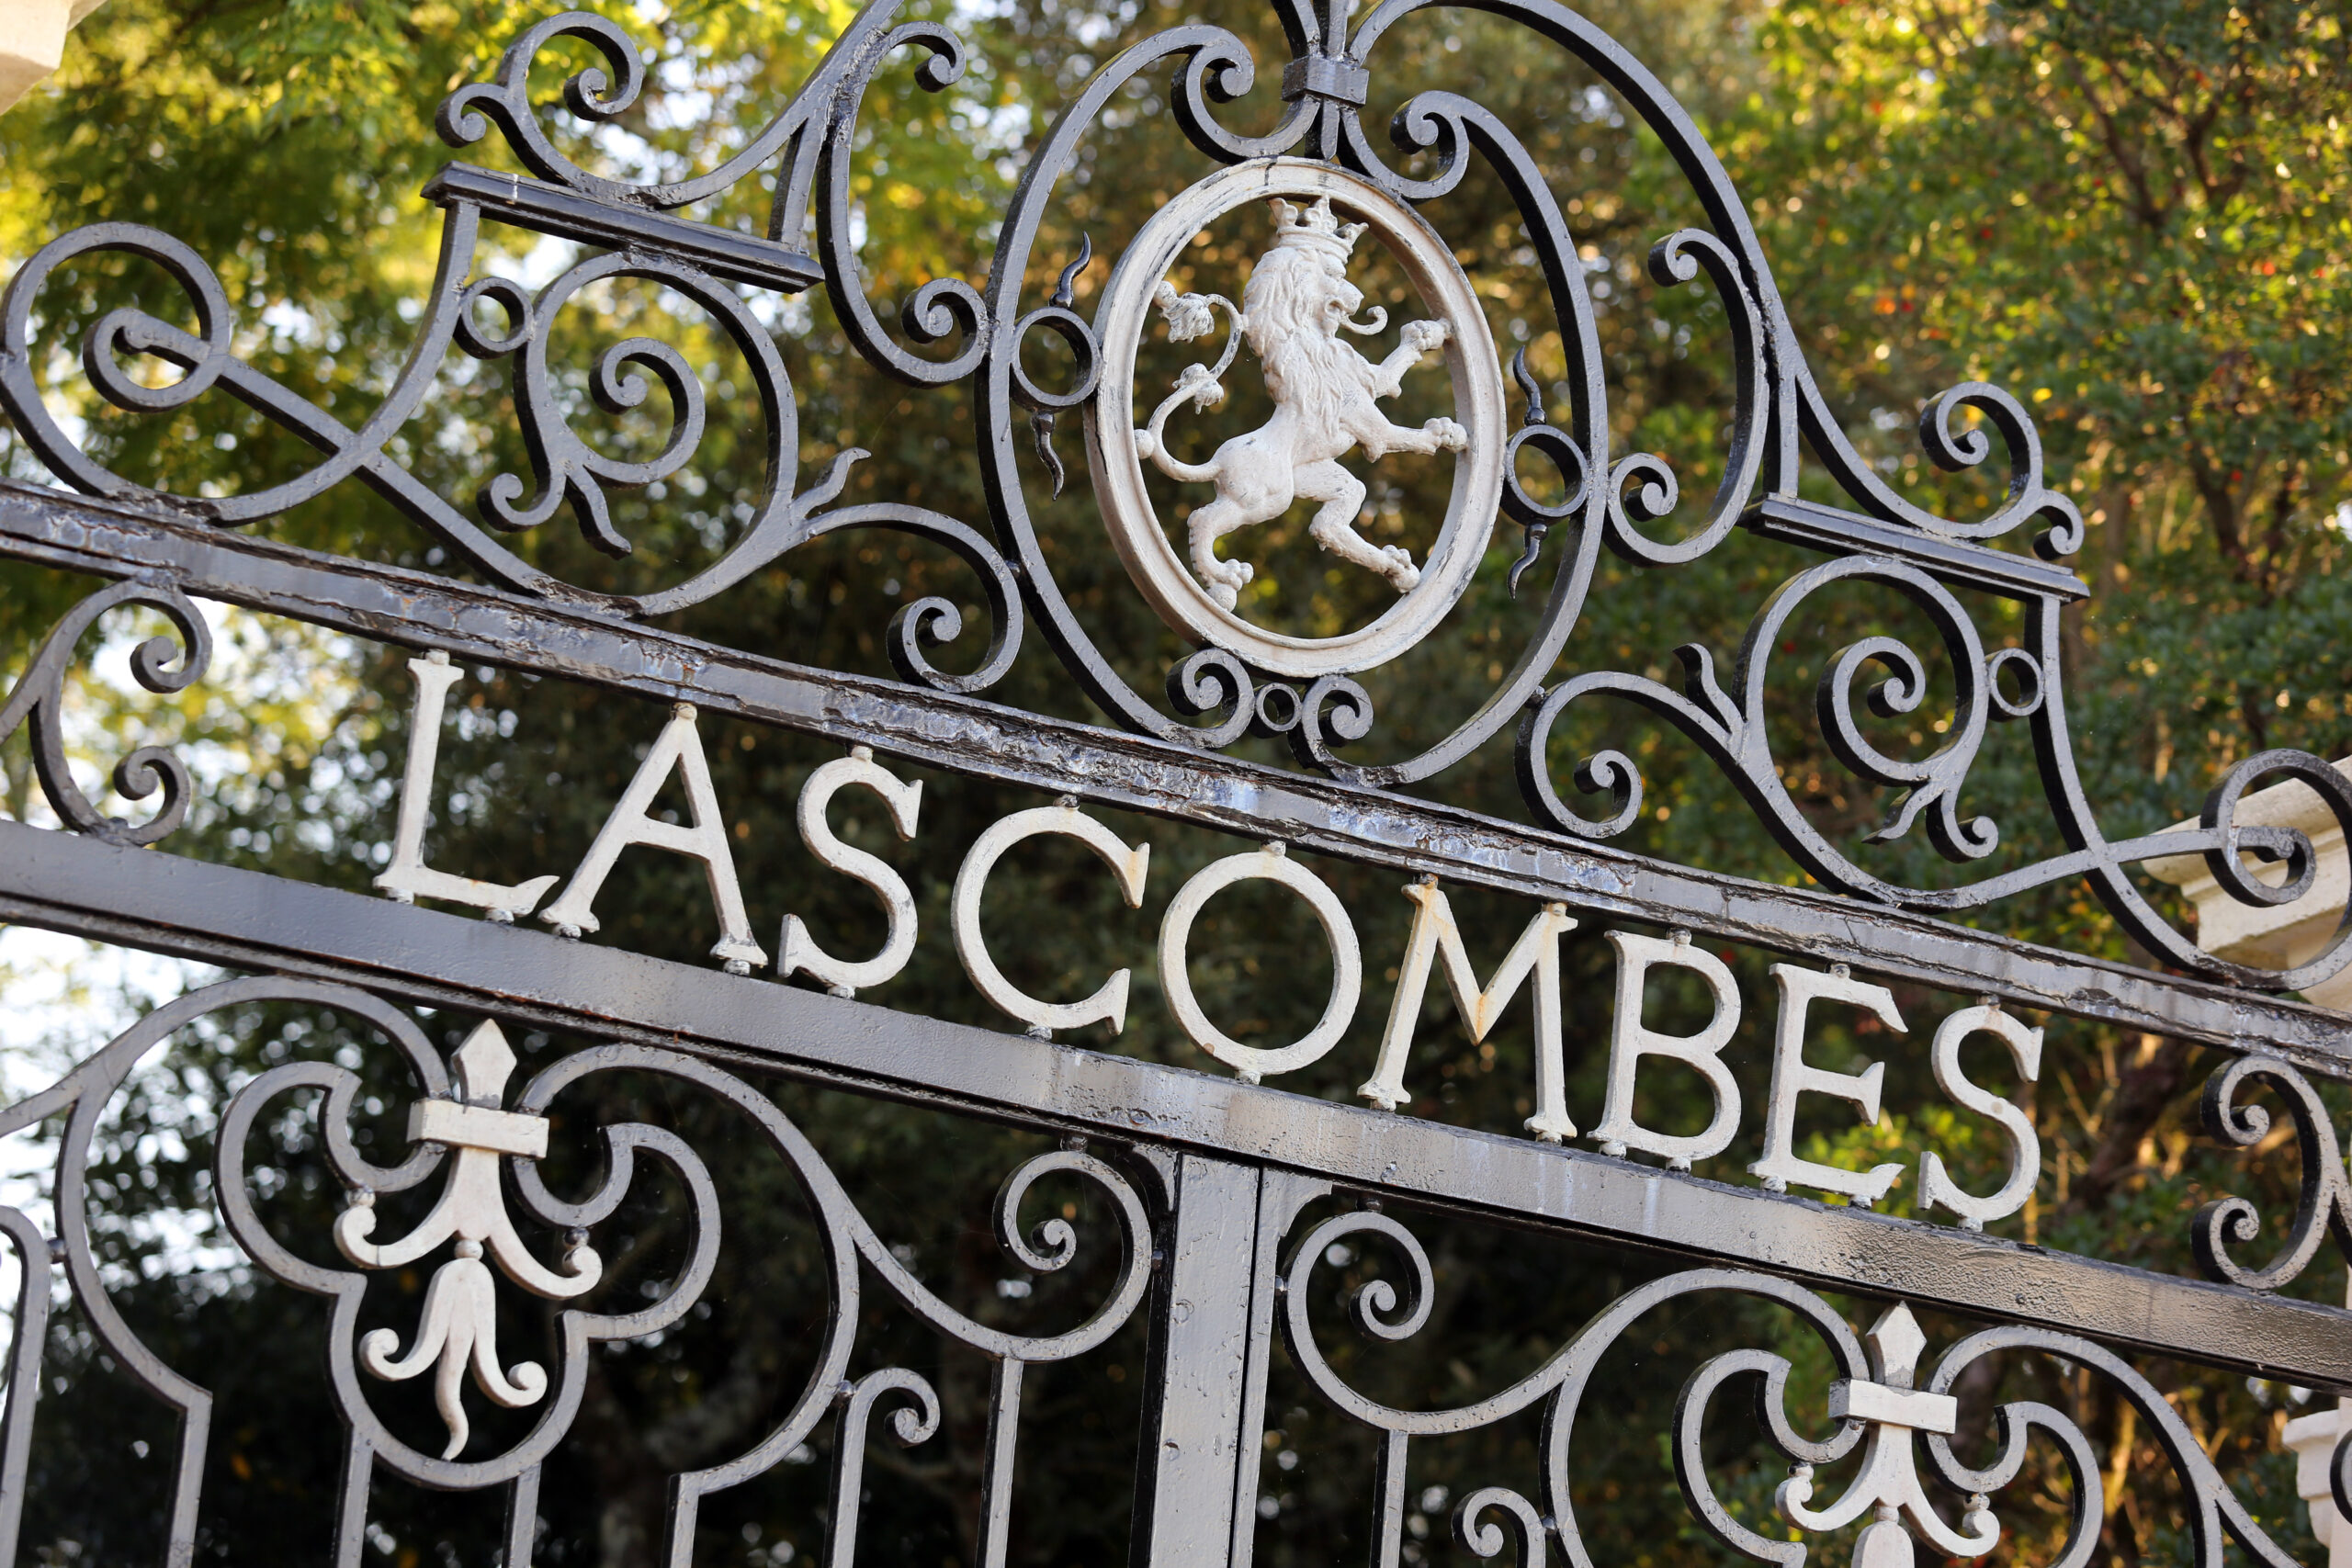 Château Lascombes changes ownership